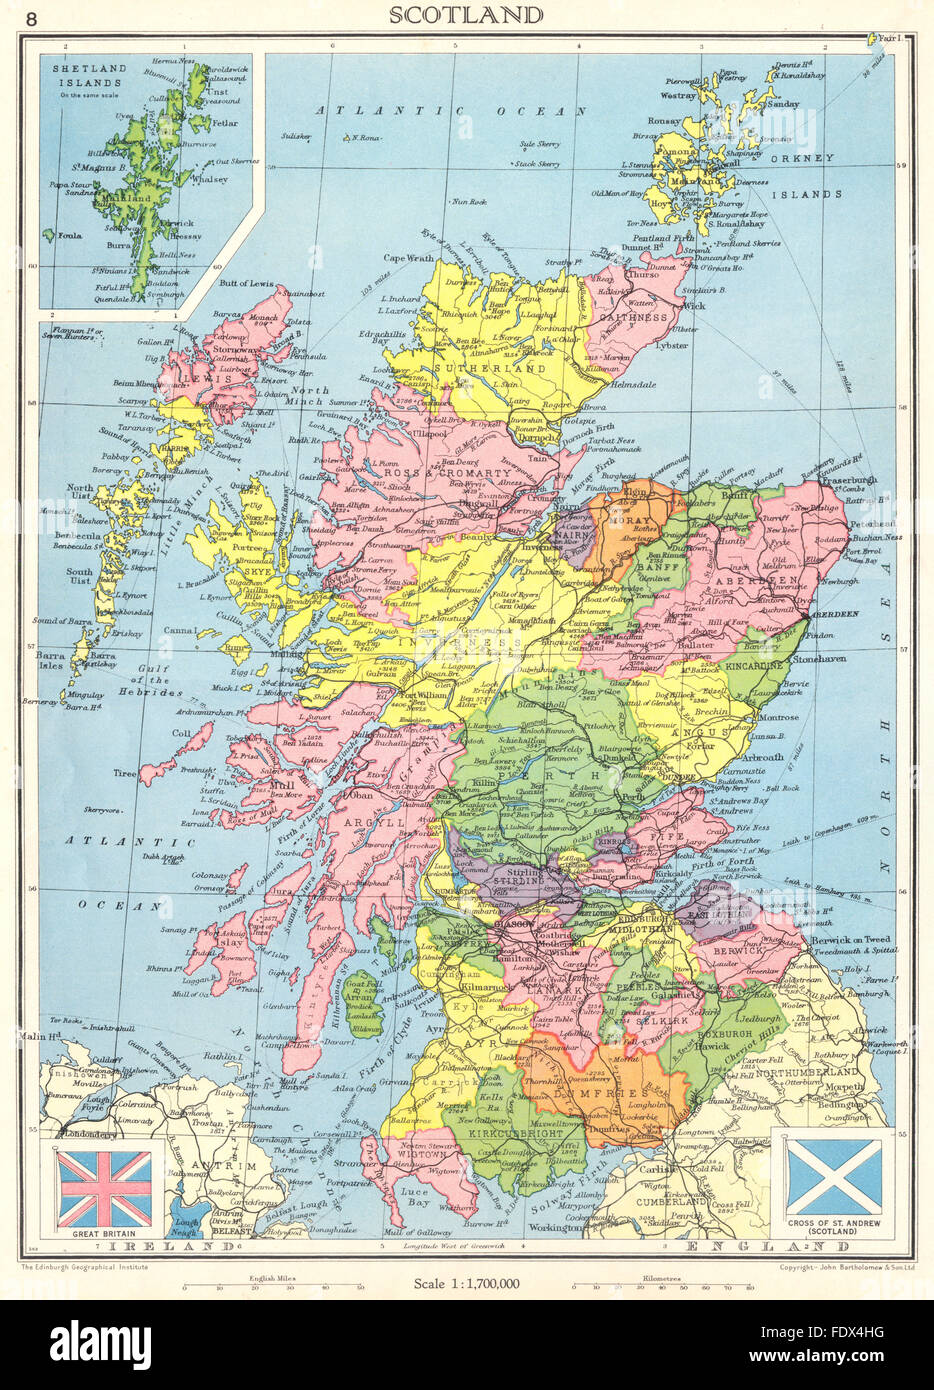 SCOTLAND: Showing counties., 1938 vintage map Stock Photo - Alamy